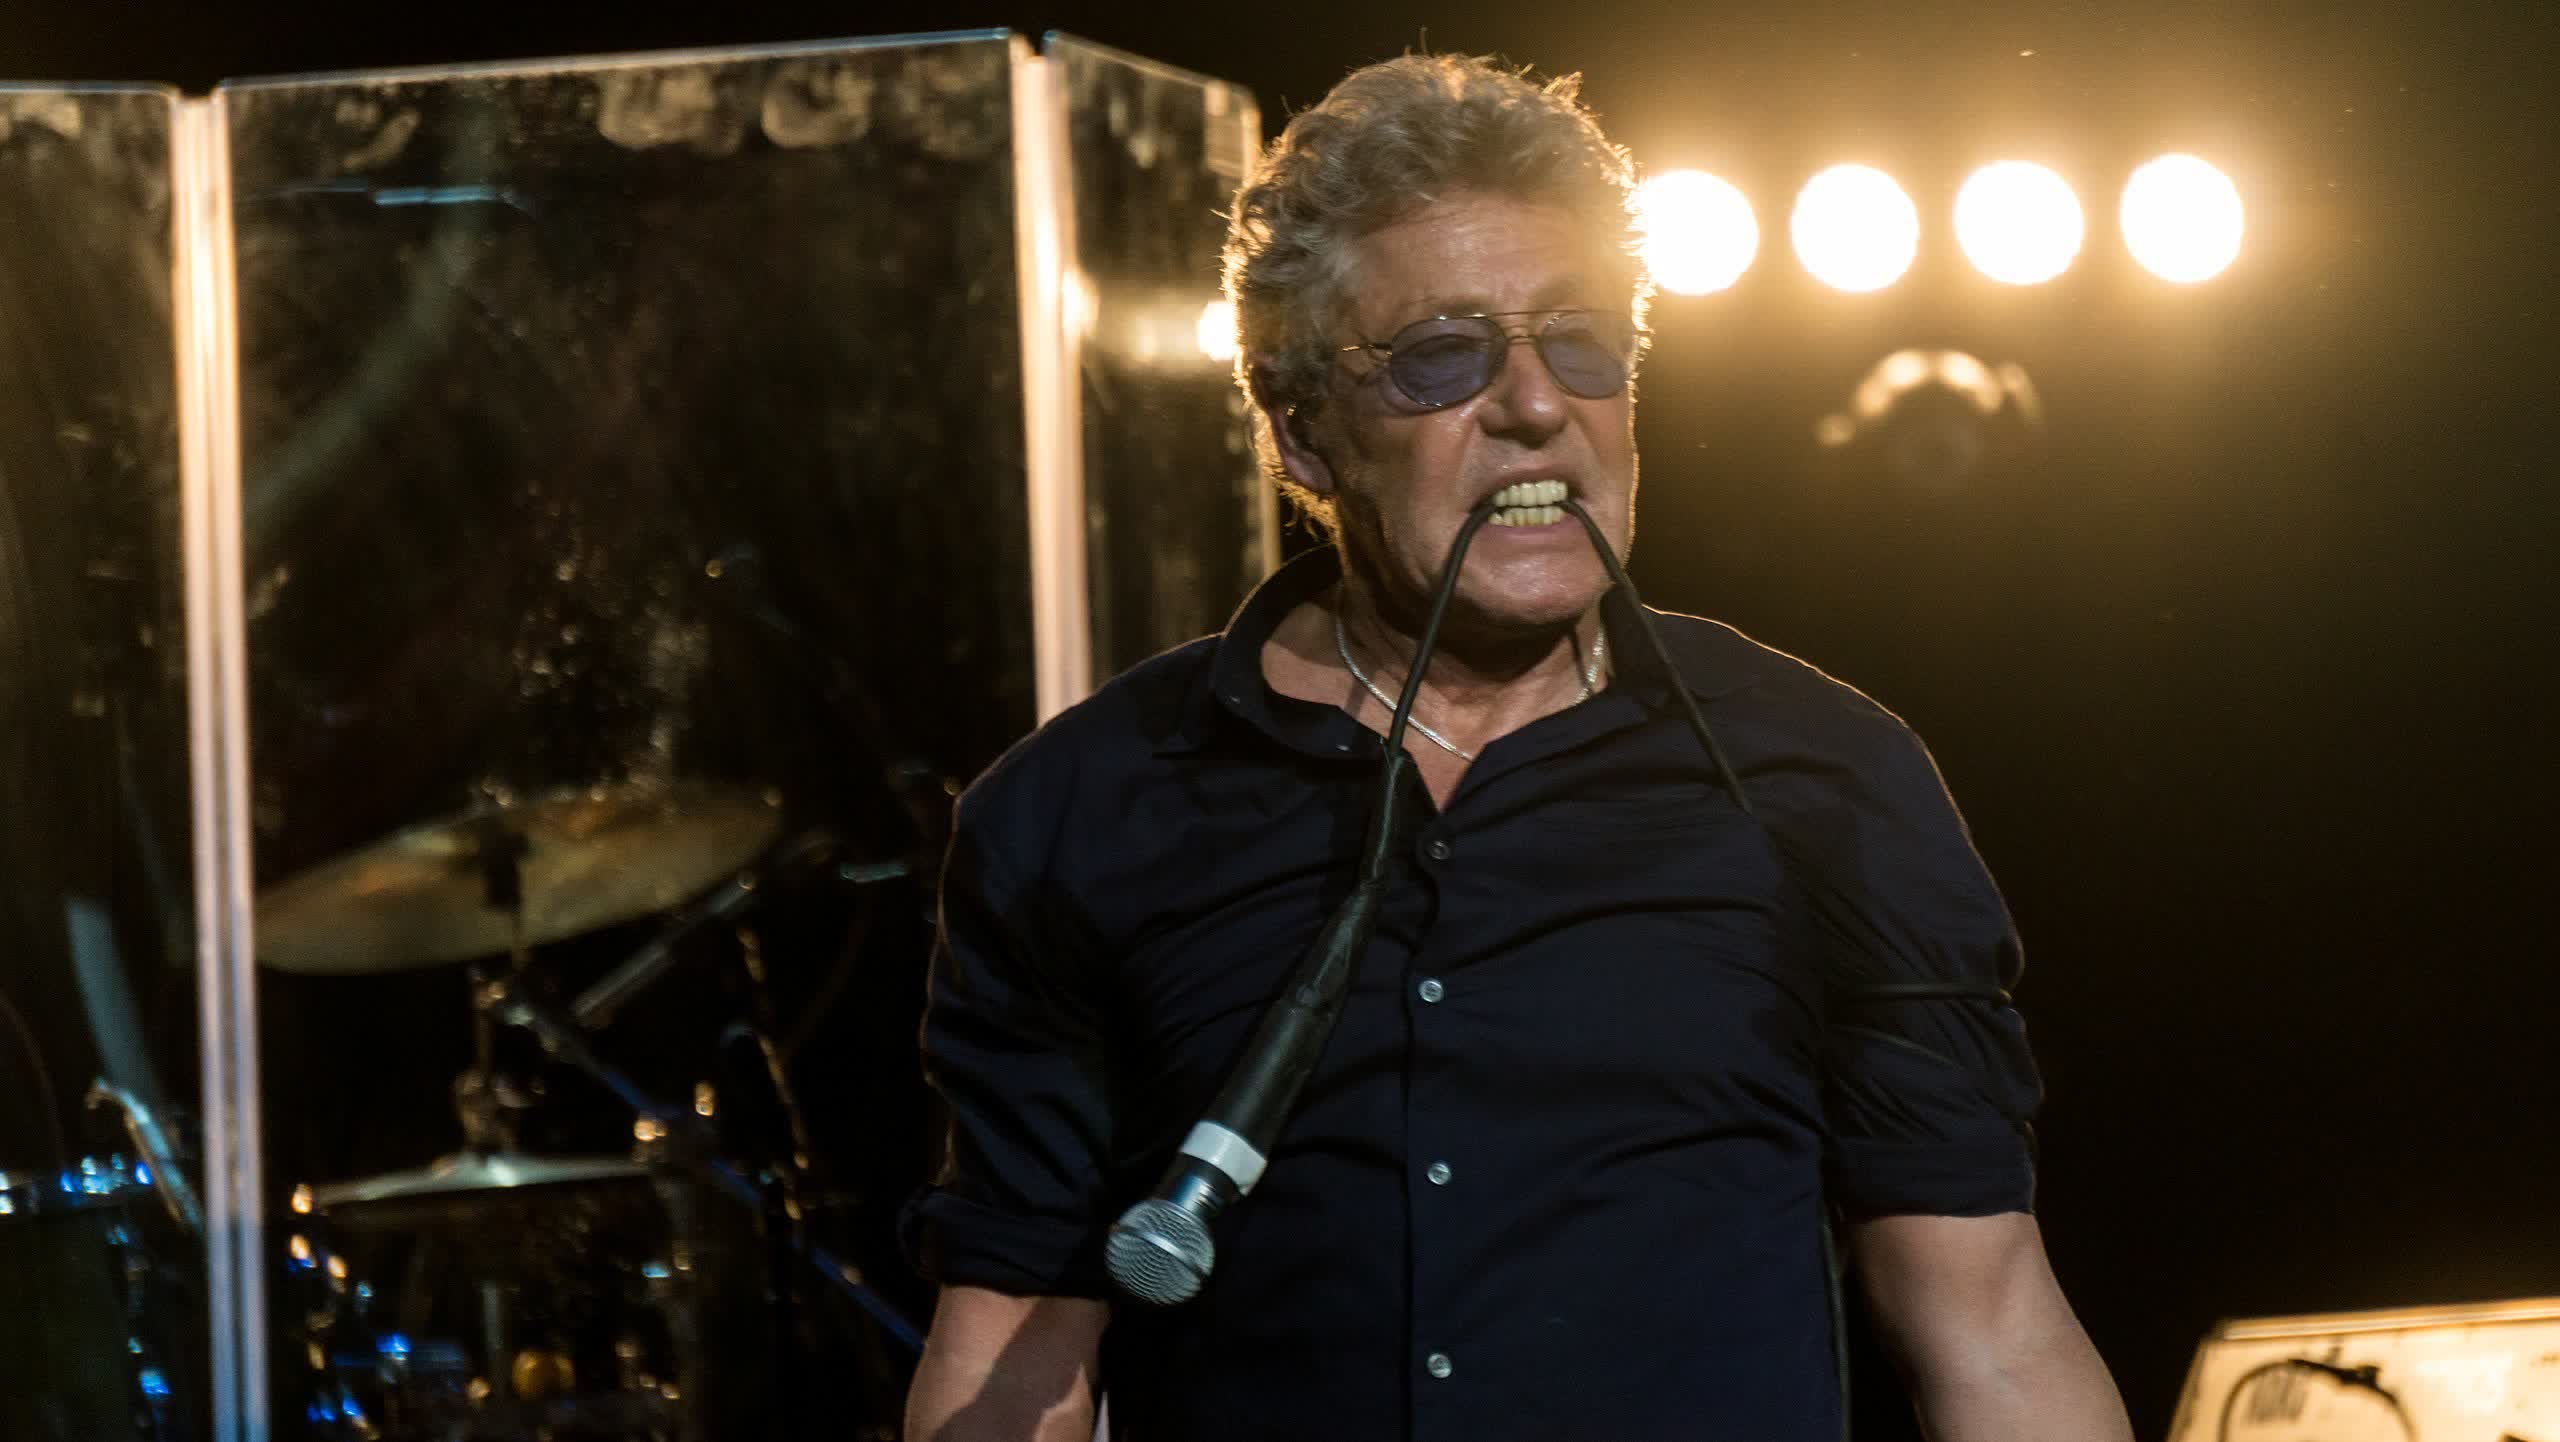 The Who's Roger Daltrey says the internet is destroying our brains, society, and civilization